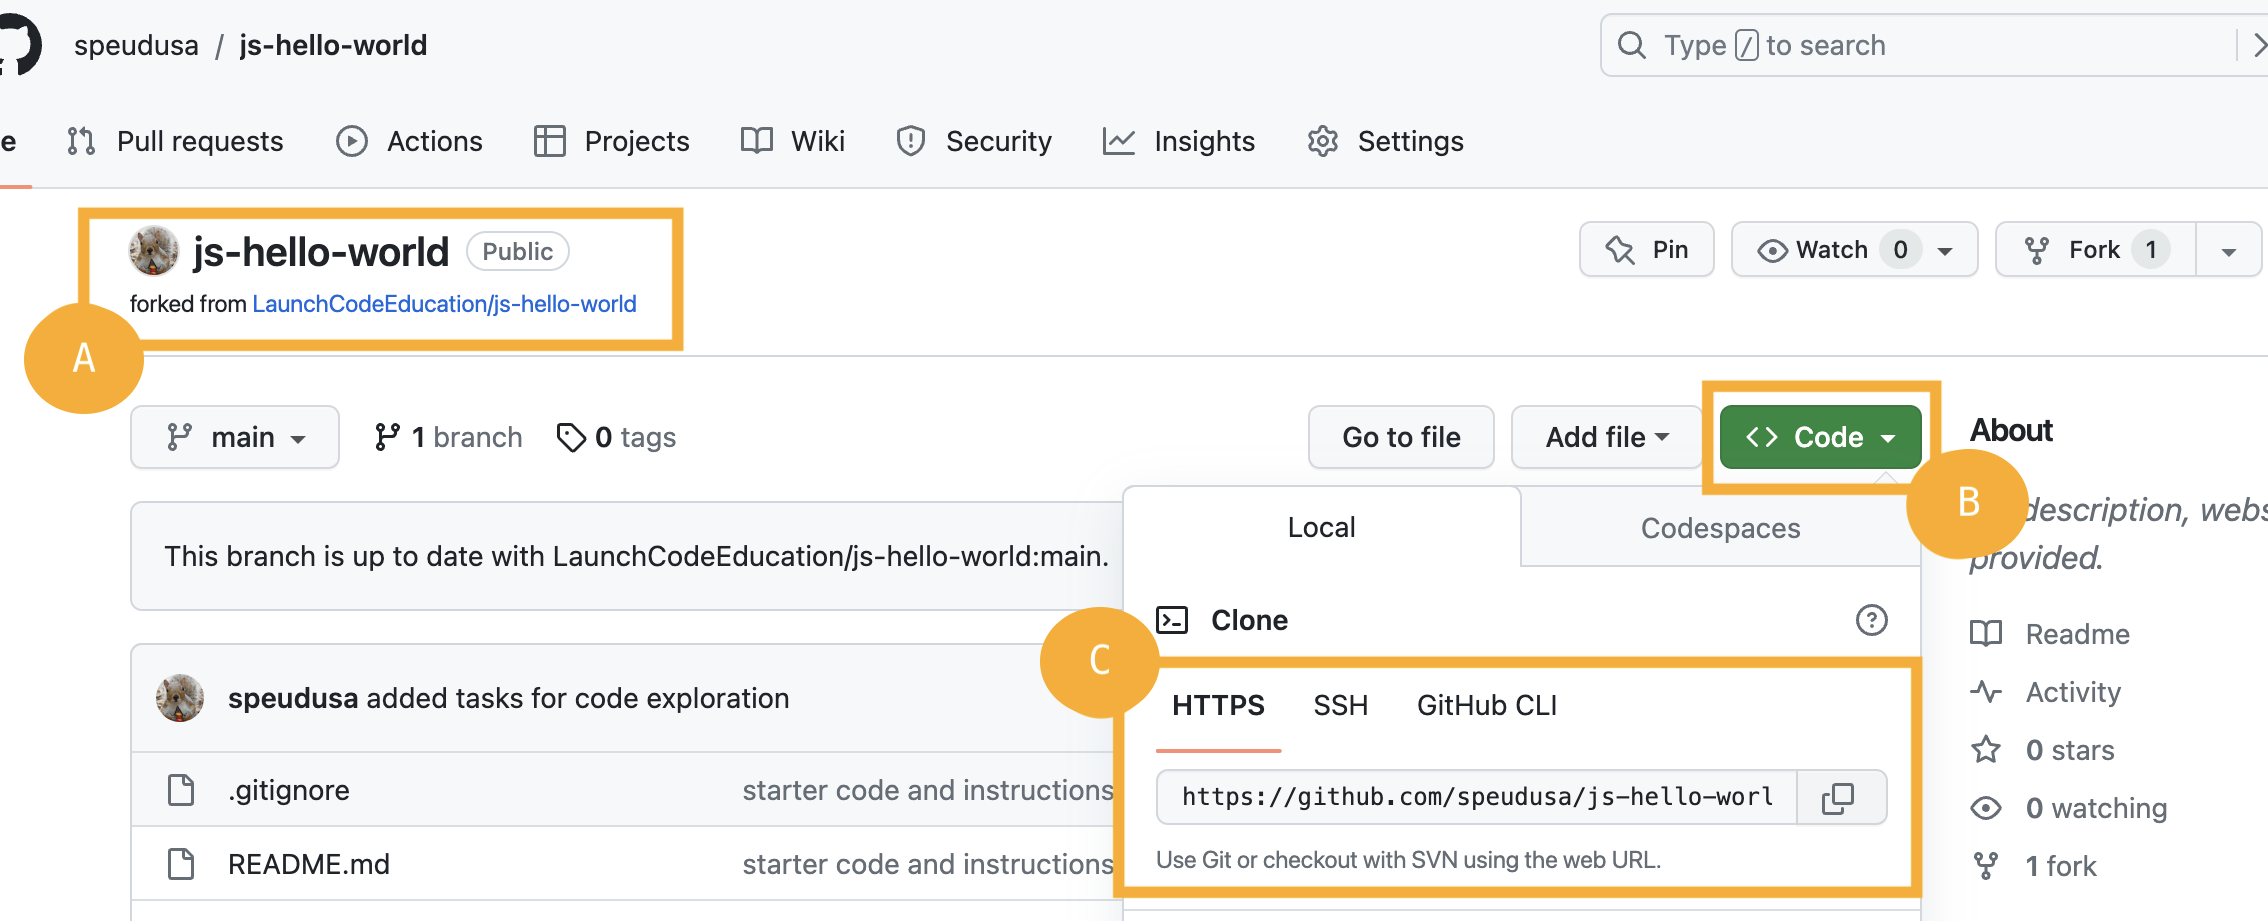 GitHub page pointing out that the repo was forked, dropdown menu to clone code is set for HTTPS